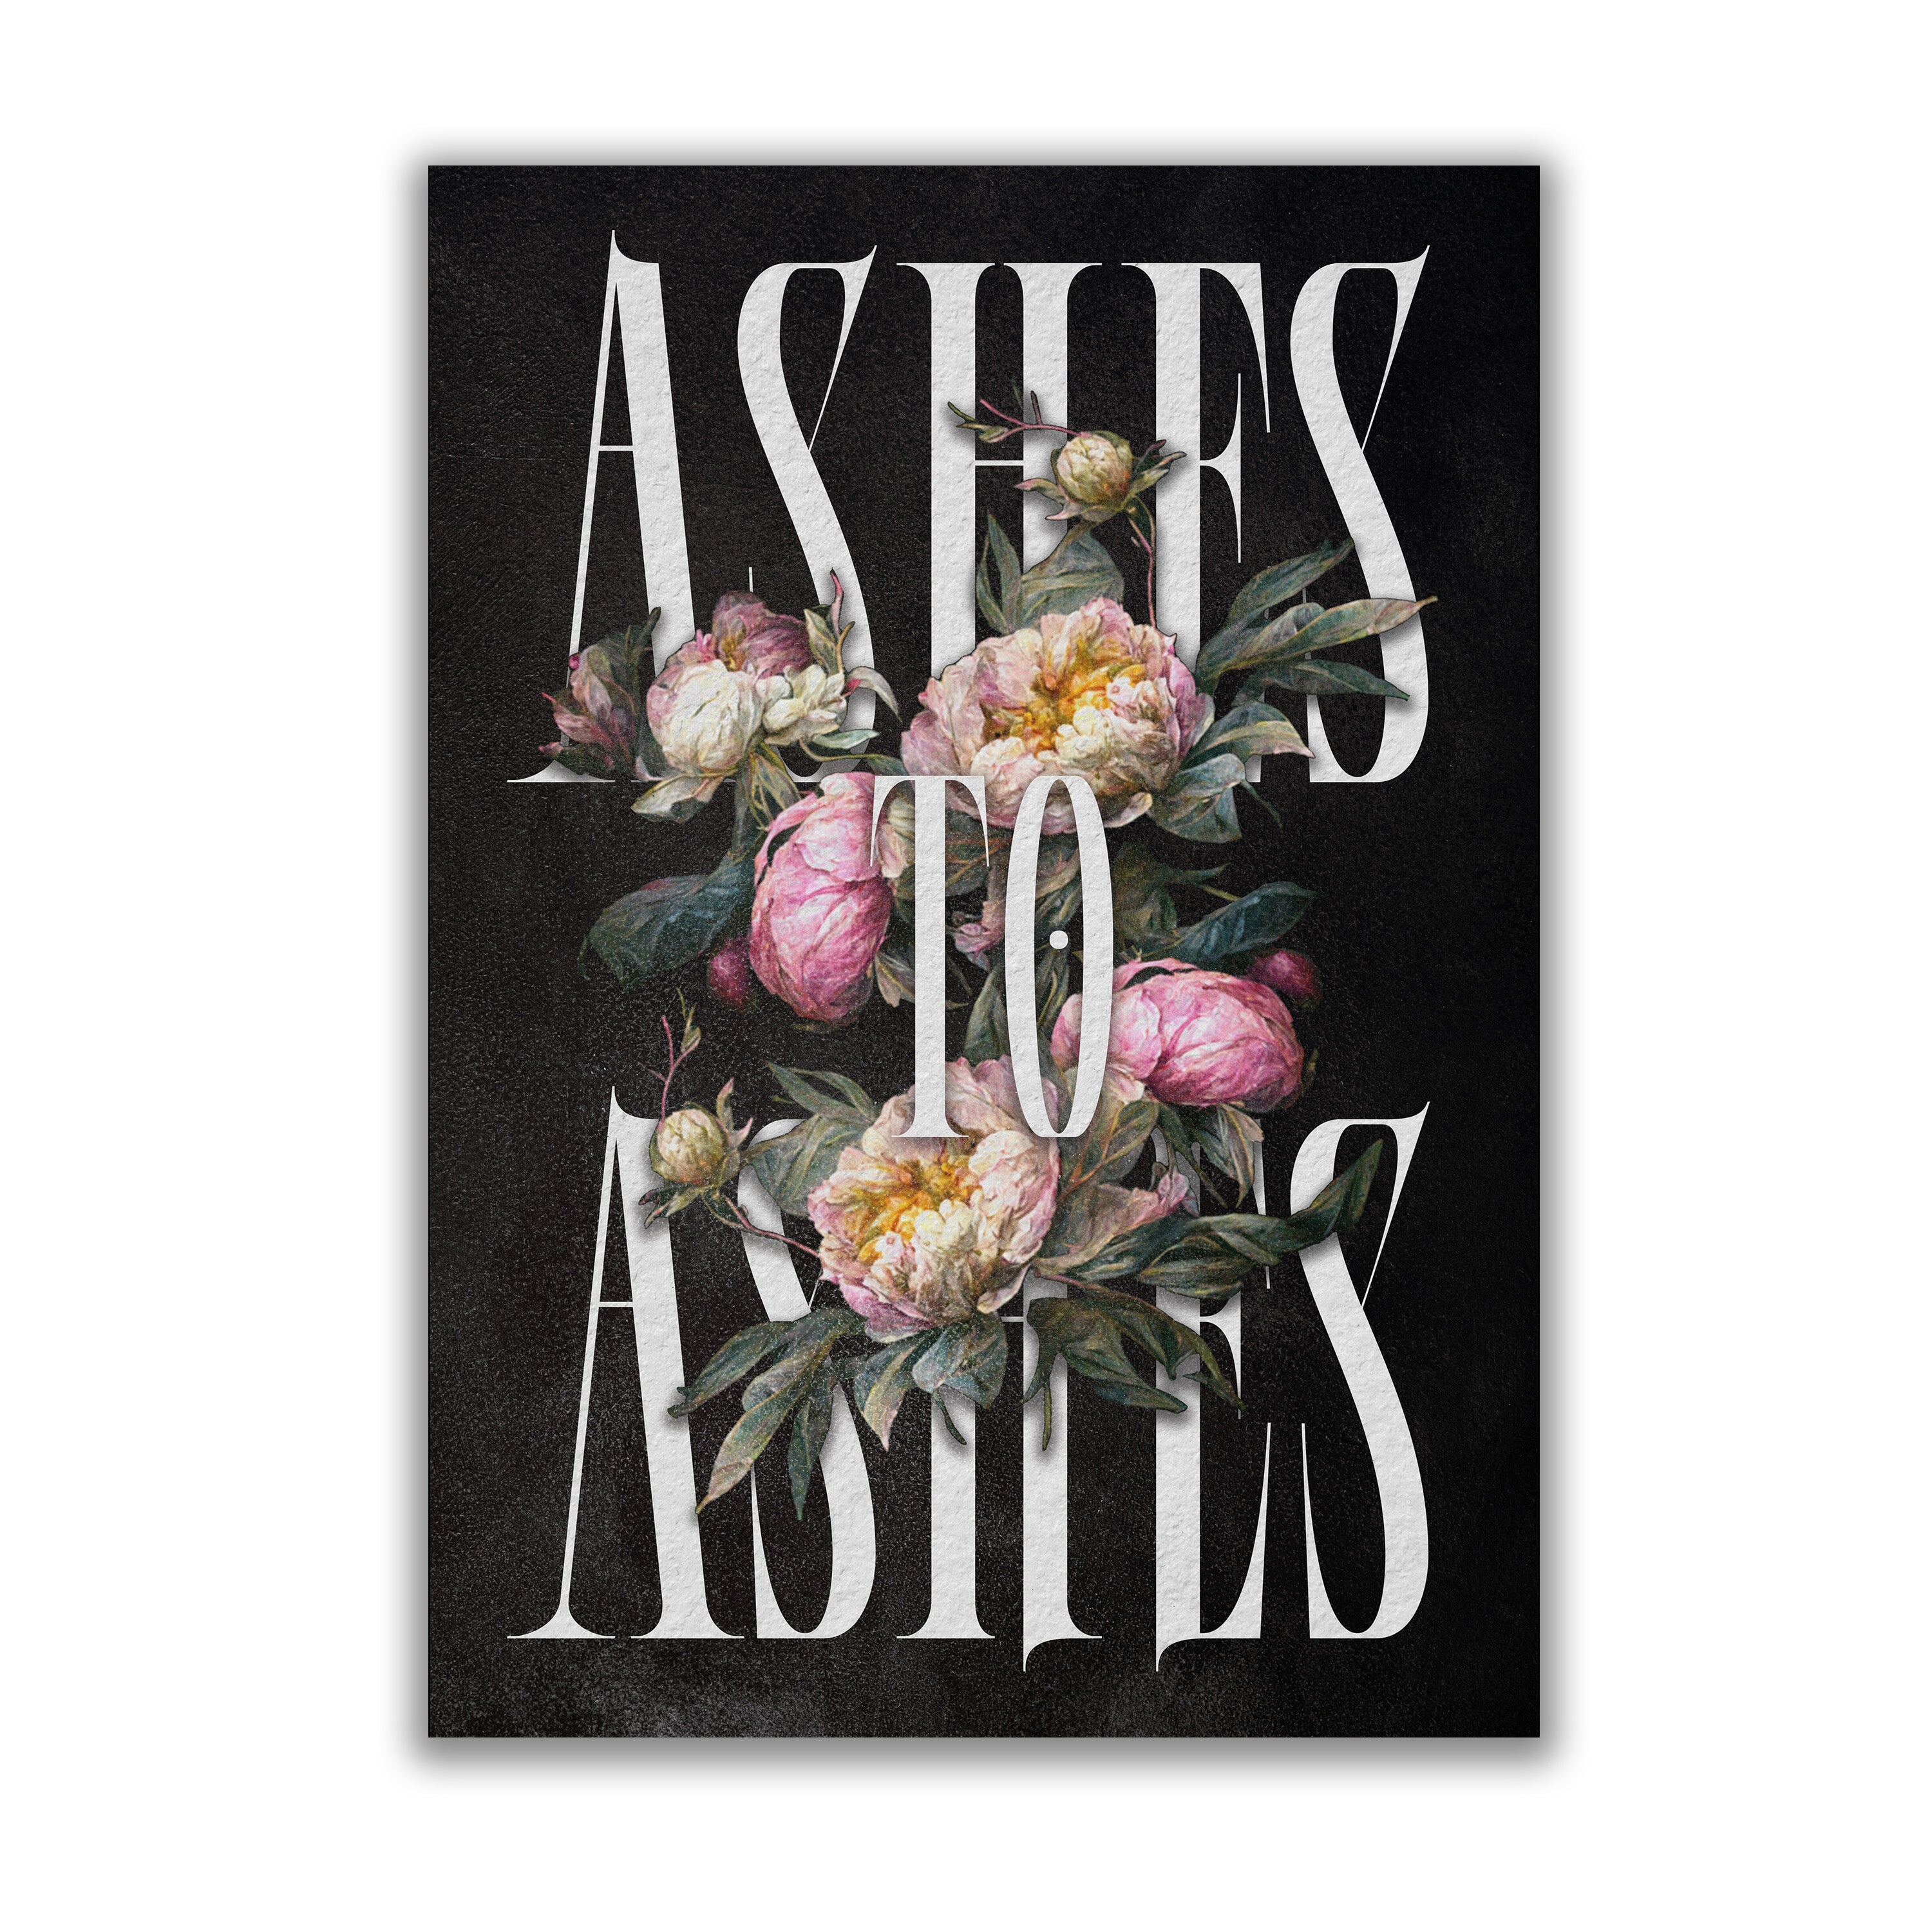 Ashes to Ashes Print by The Blackened Teeth